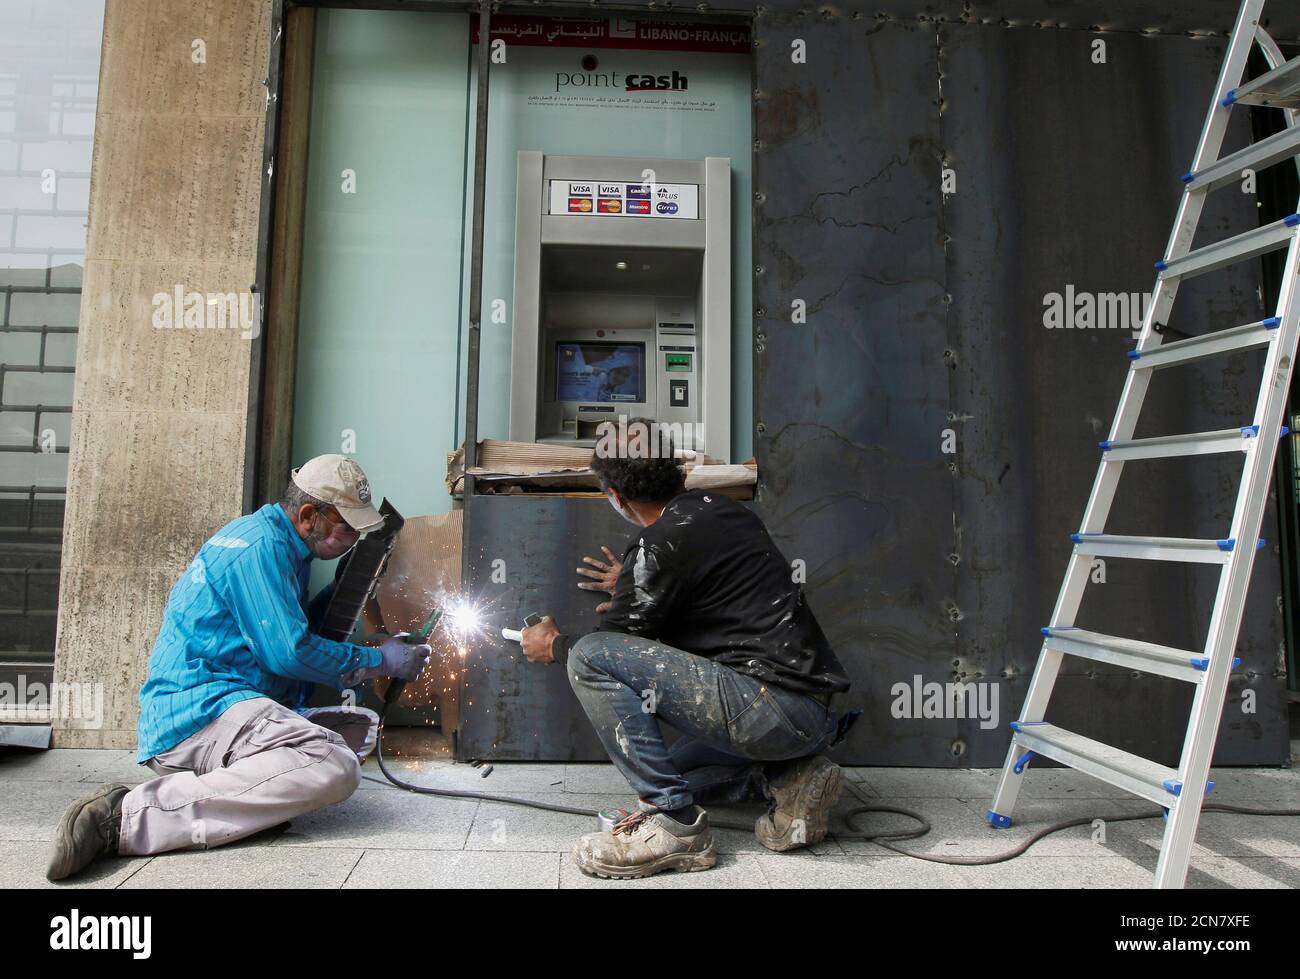 Workers board up an ATM machine at a branch of Banque Libano Francaise (BLF), as a protection measure amid protests against growing economic hardship, in Beirut, Lebanon April 30, 2020. REUTERS/Mohamed Azakir Stock Photo